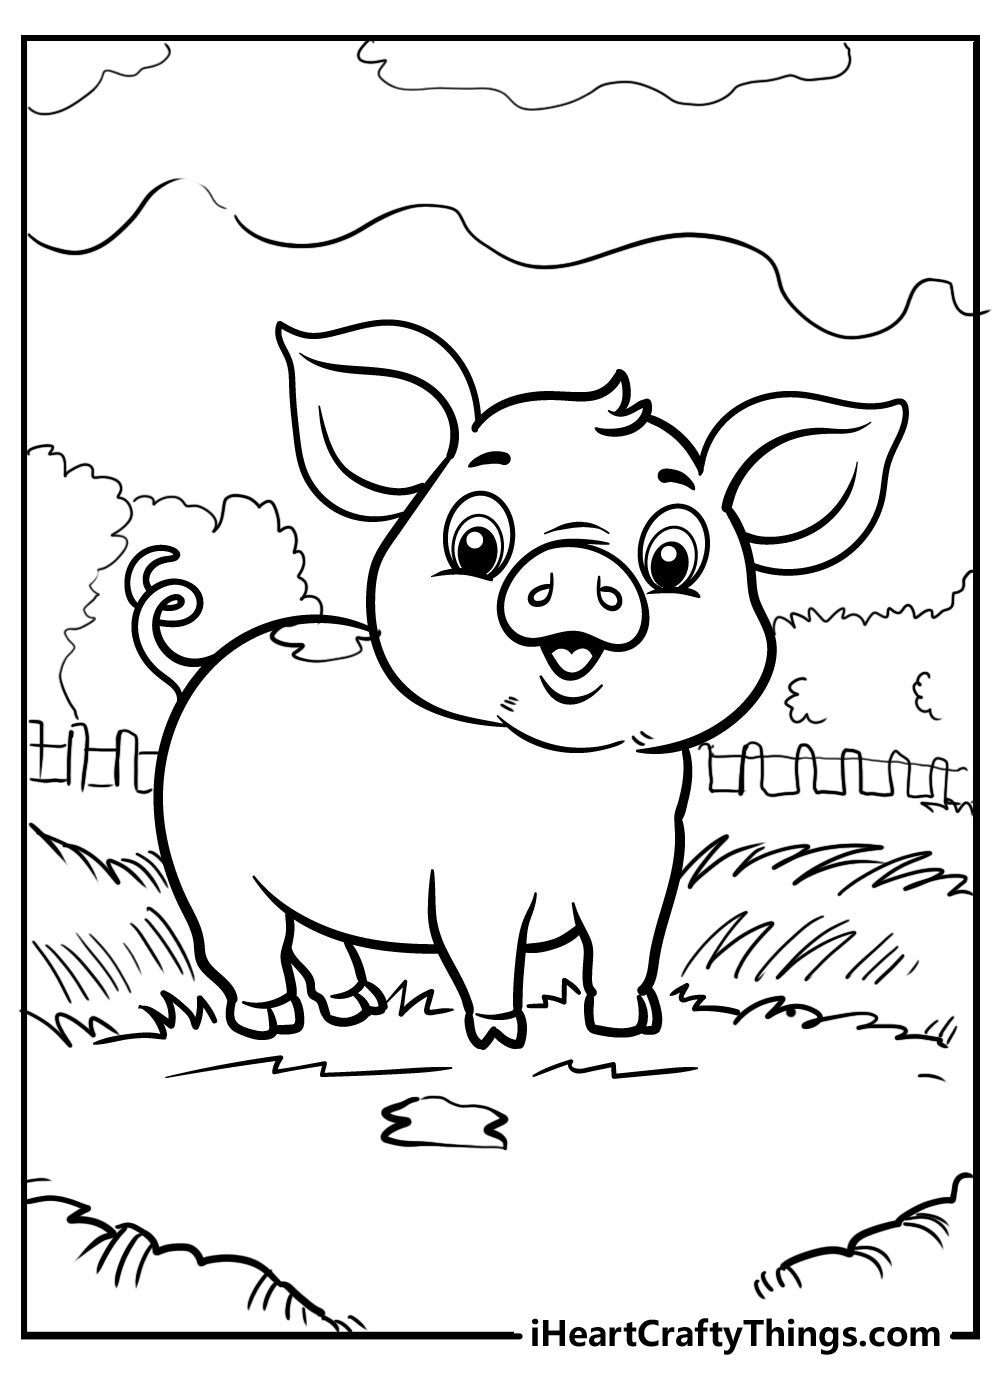 Pig coloring pages free printables